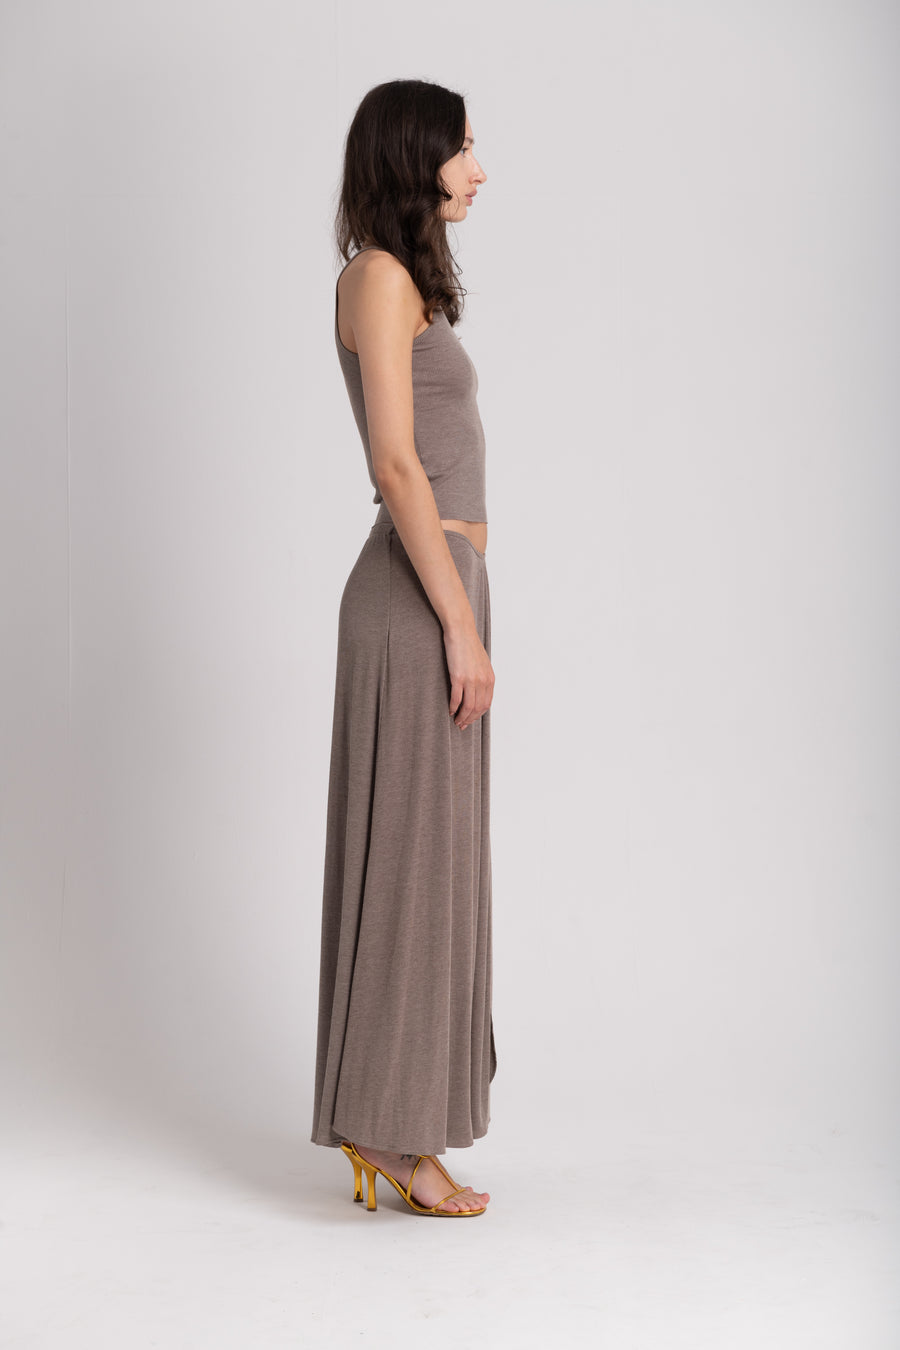 THE SOUTH SKIRT - TAUPE